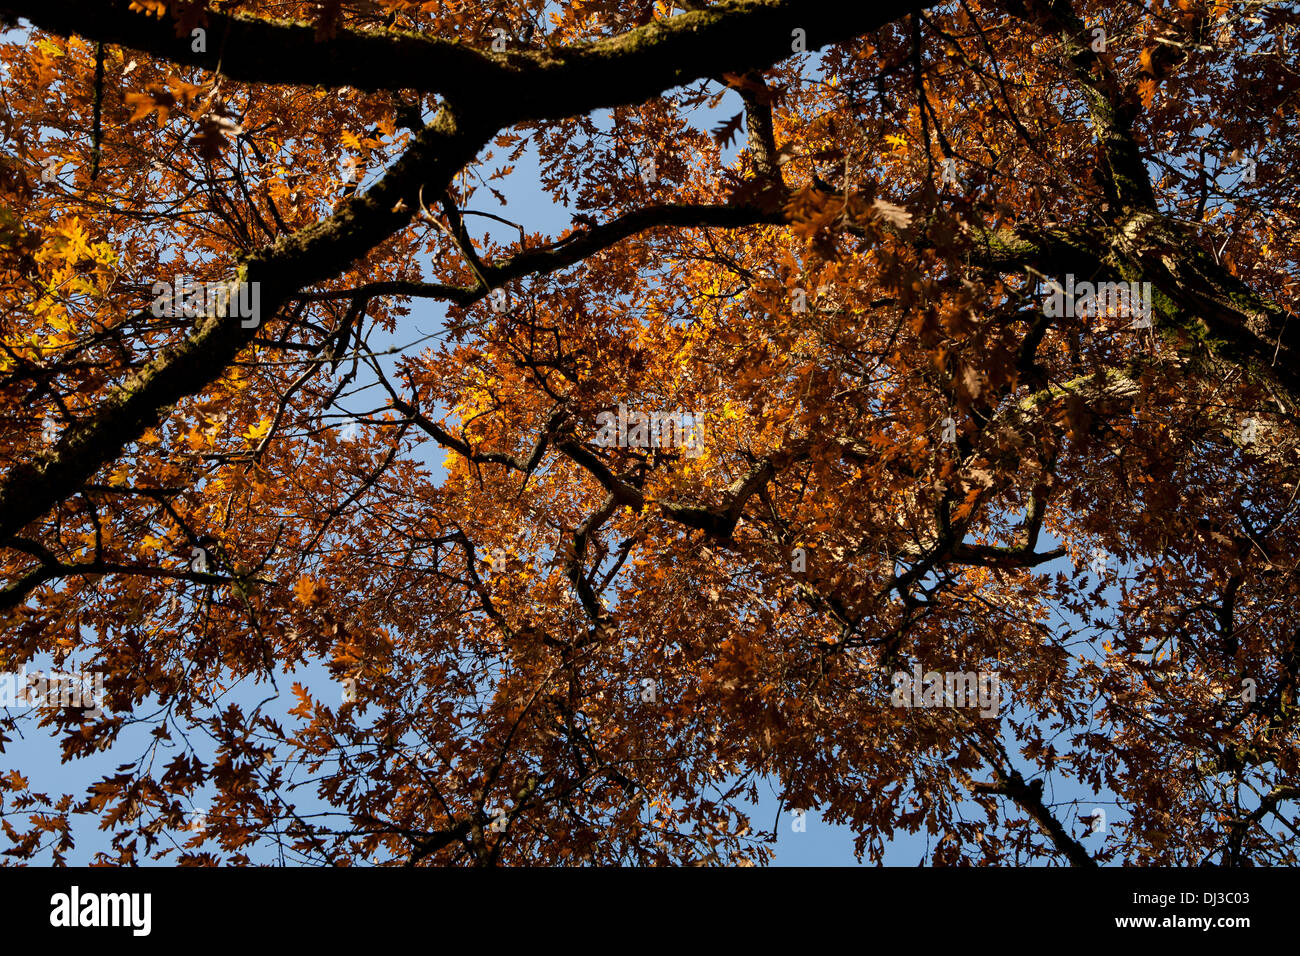 Sycamore branches in autumn with golden leaves Stock Photo